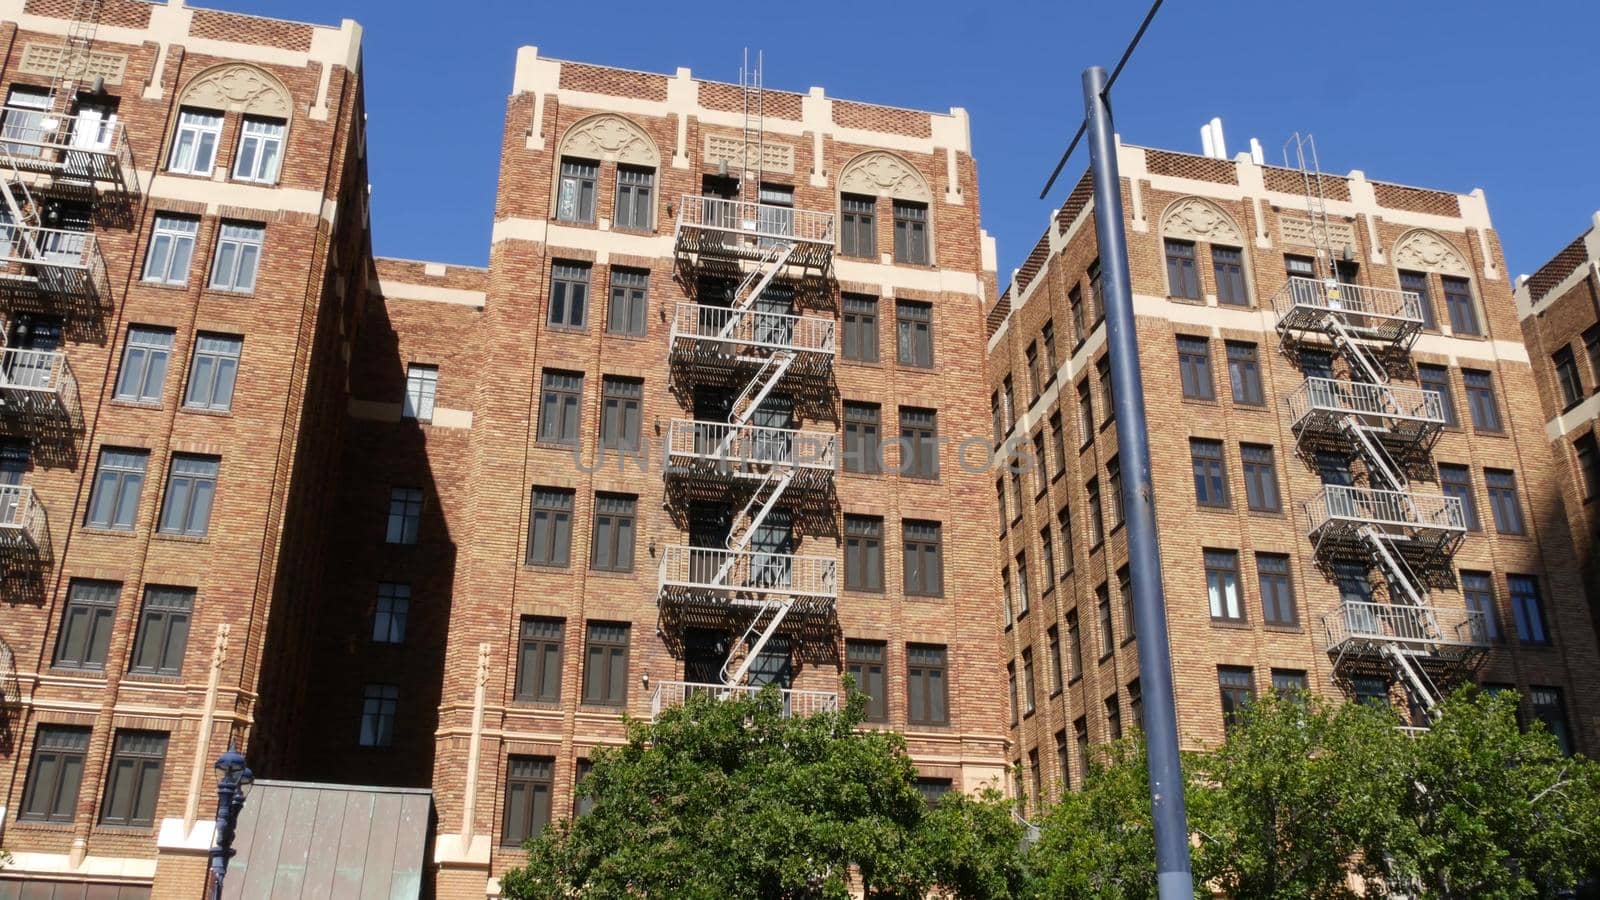 Fire escape ladder outside residential brick building in San Diego city, USA. Typical New York style emergency exit for safe evacuation. Classic retro house exterior as symbol of real estate property.